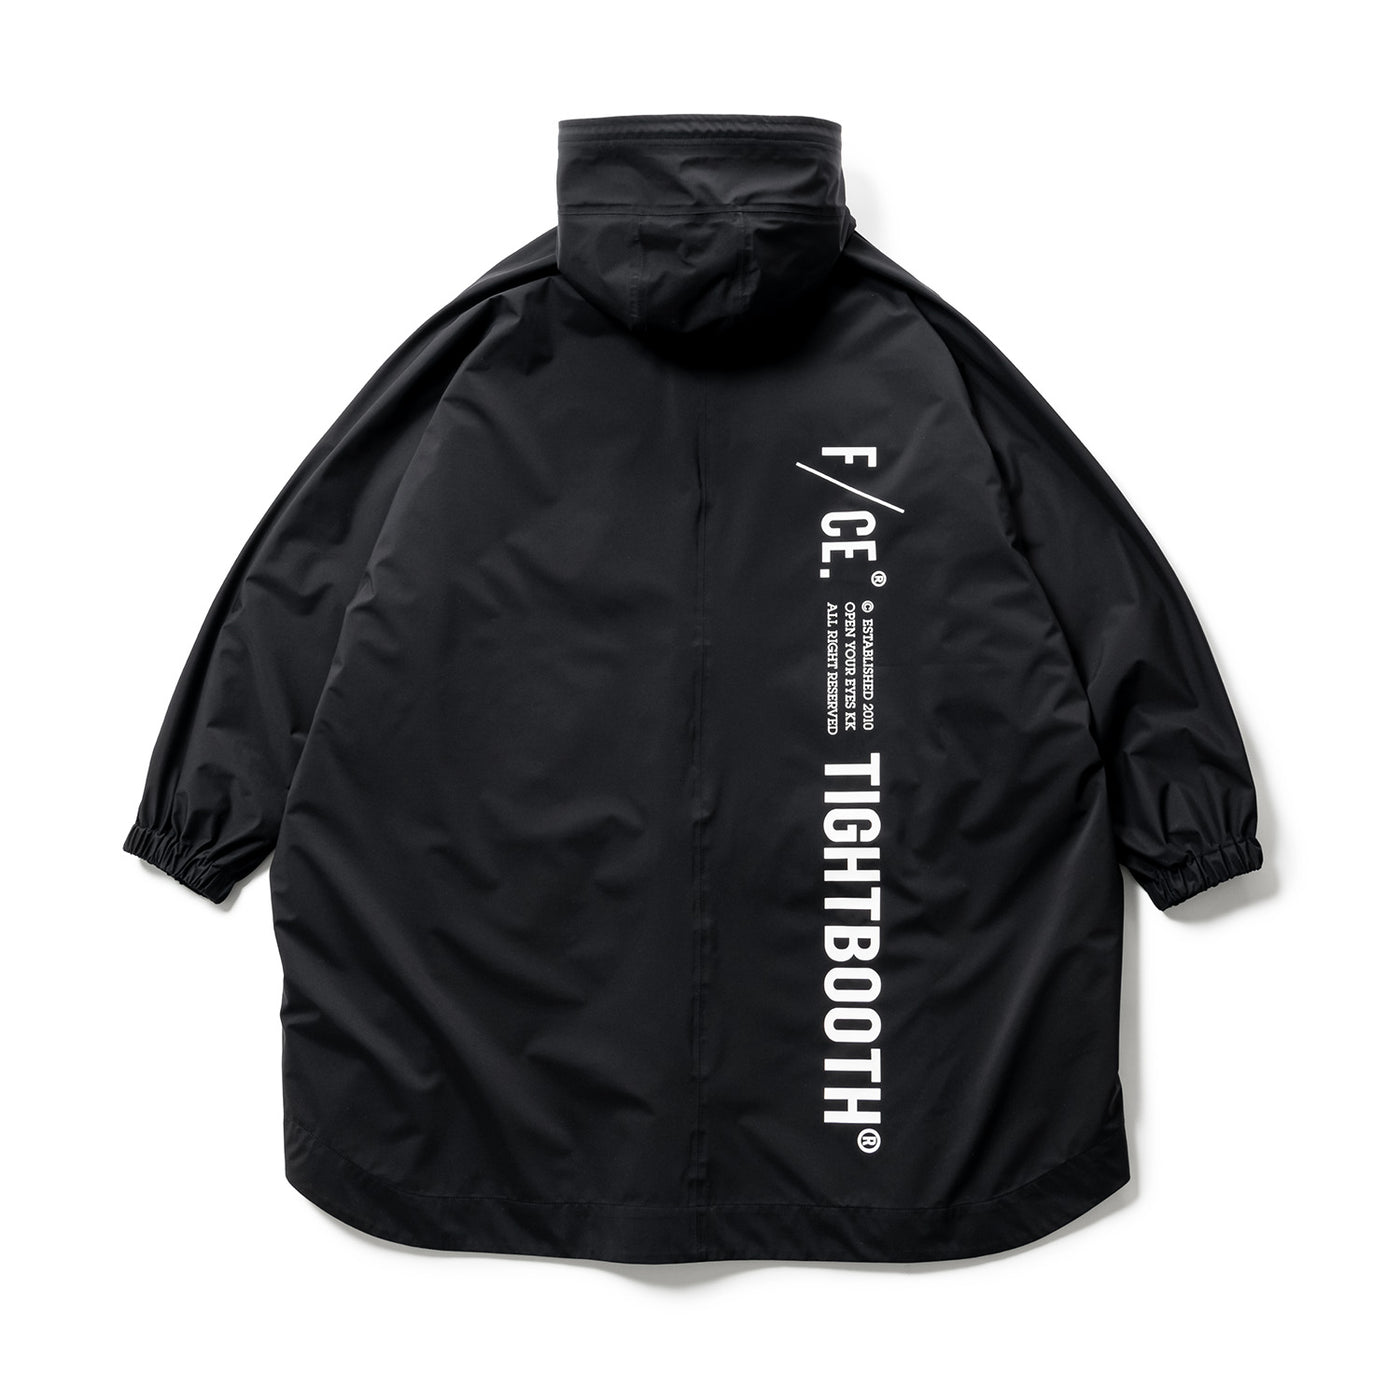 TIGHTBOOTH x F/CE. RAIN COAT | Why are you here?